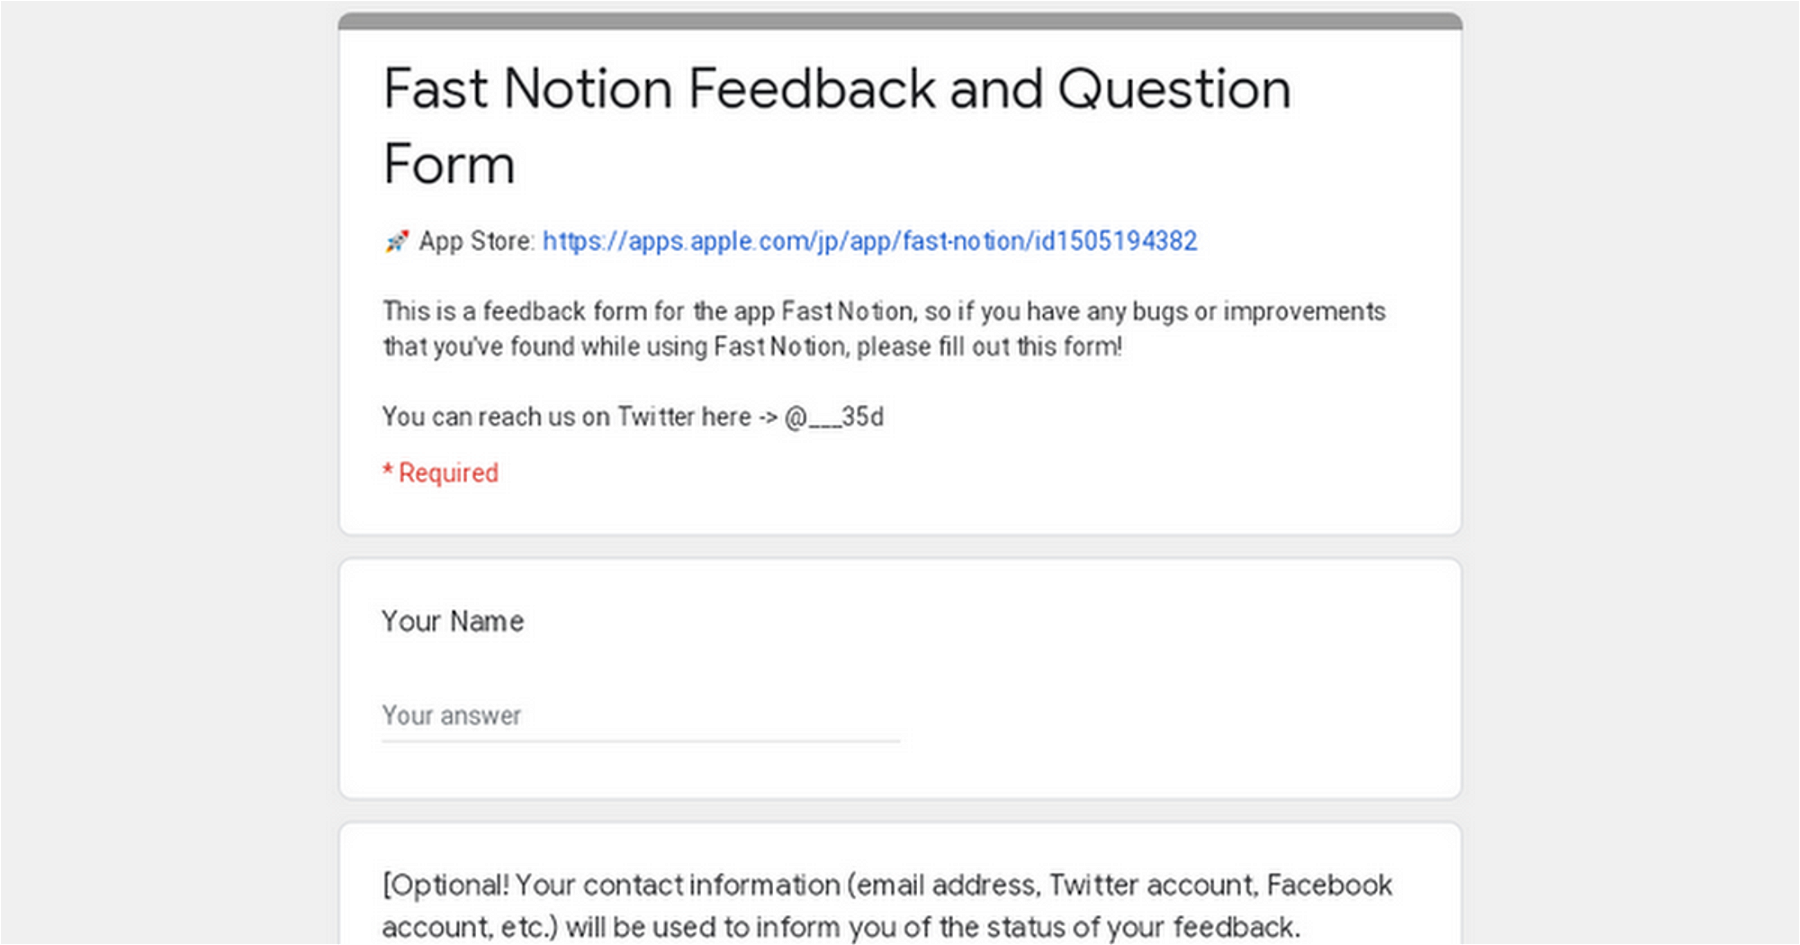 Fast Notion Feedback and Question Form